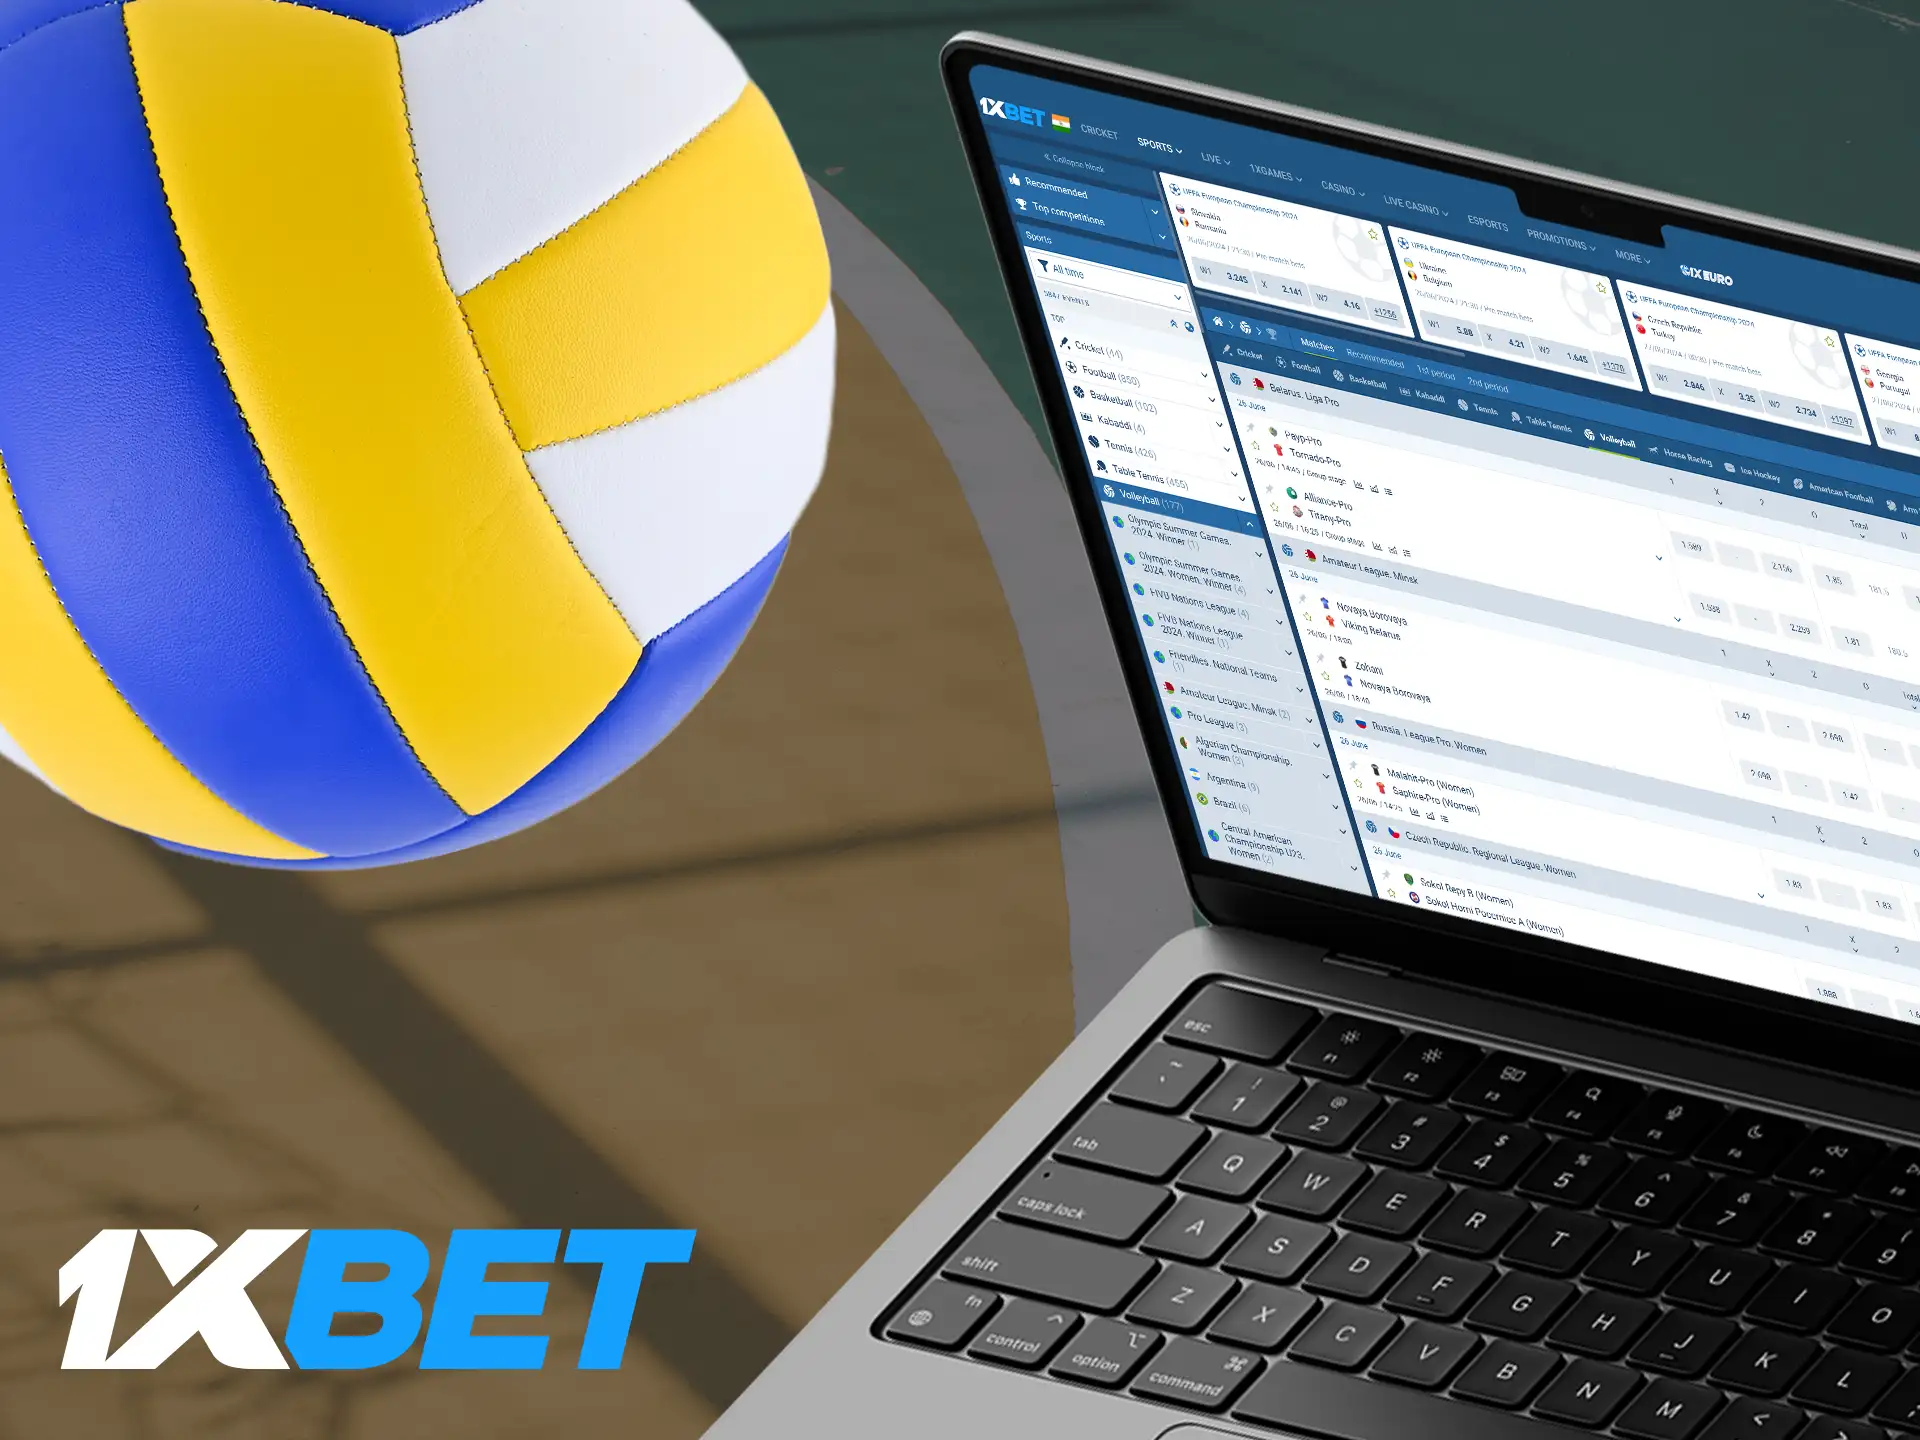 1xBet offers a vast selection of volleyball matches to wager on.